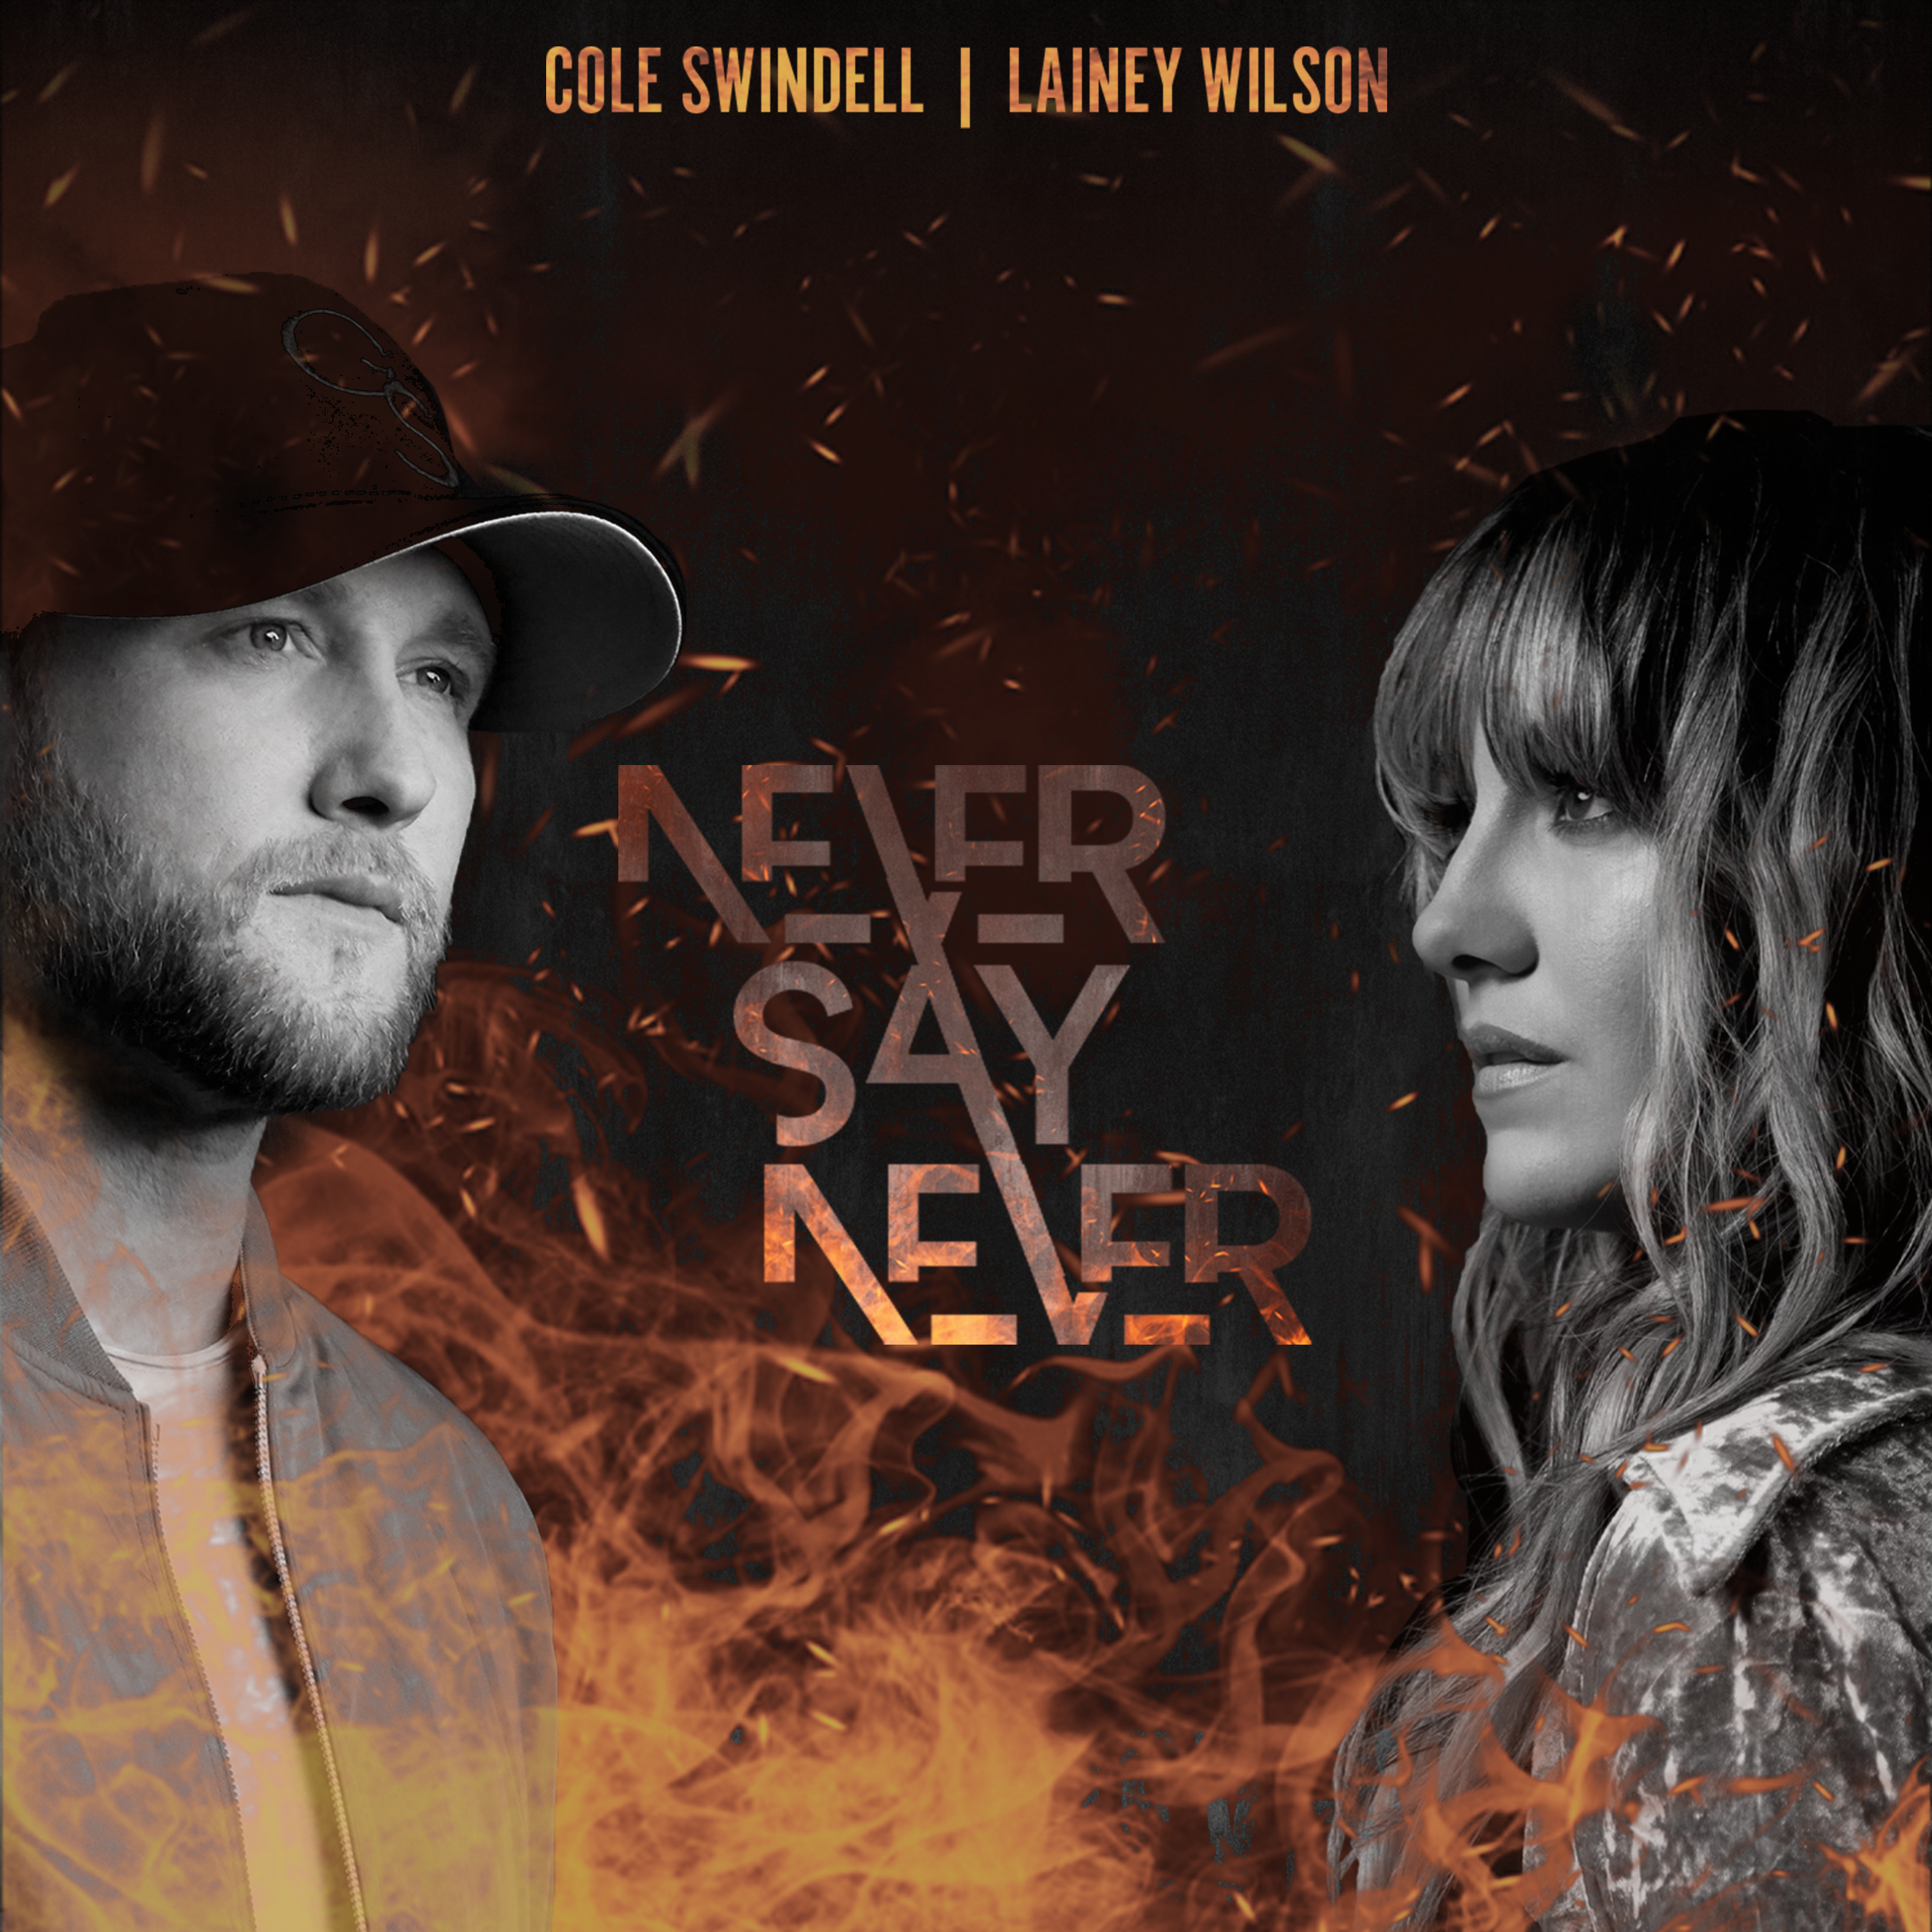 COLE SWINDELL RELEASES DUET WITH LAINEY WILSON “NEVER SAY NEVER” 